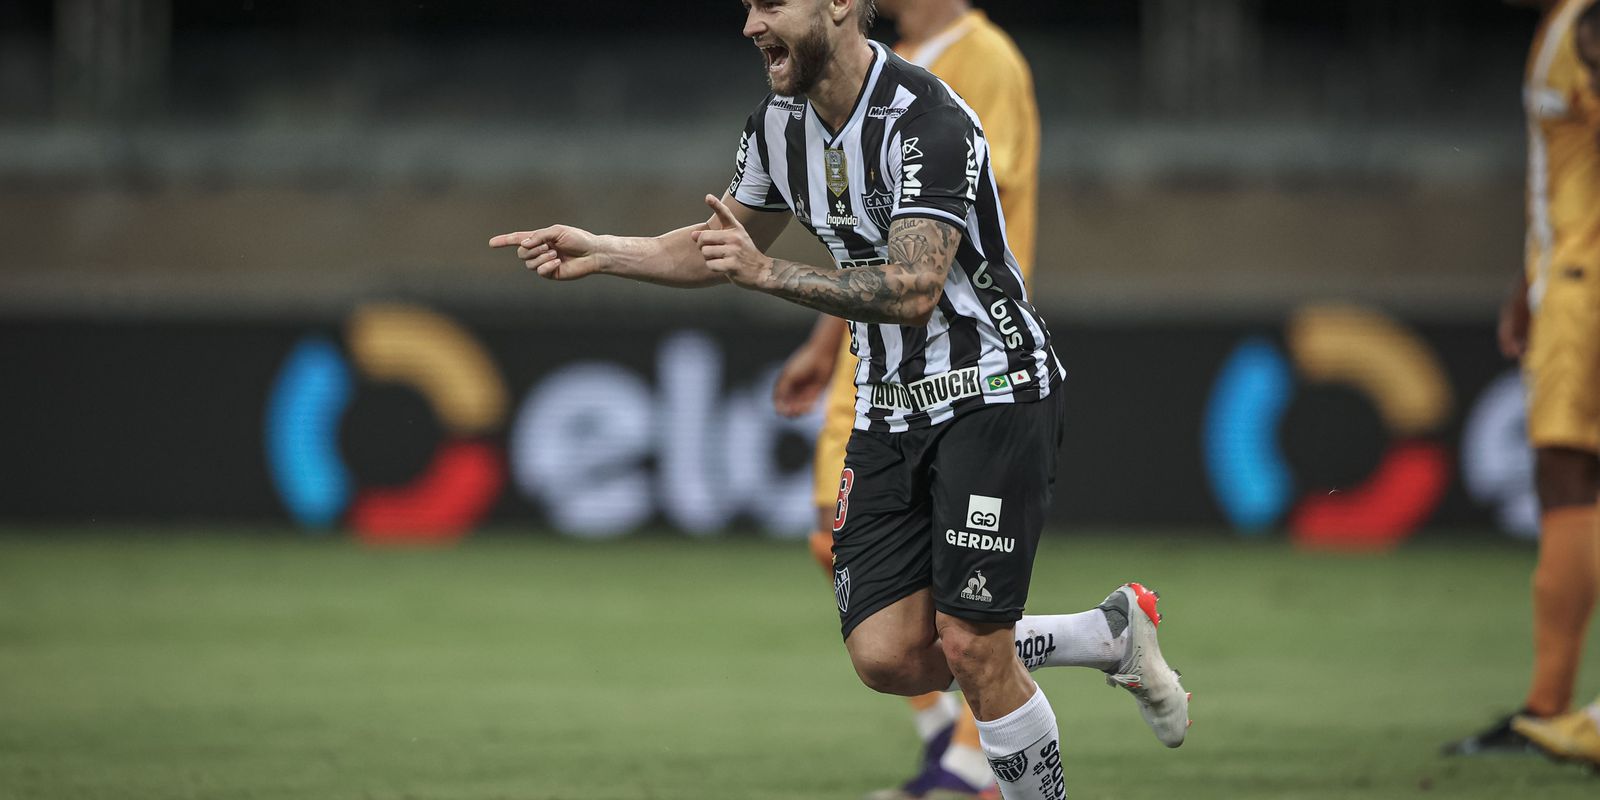 Atlético-MG wins with goals from Eduardo Sasha in the Copa do Brasil